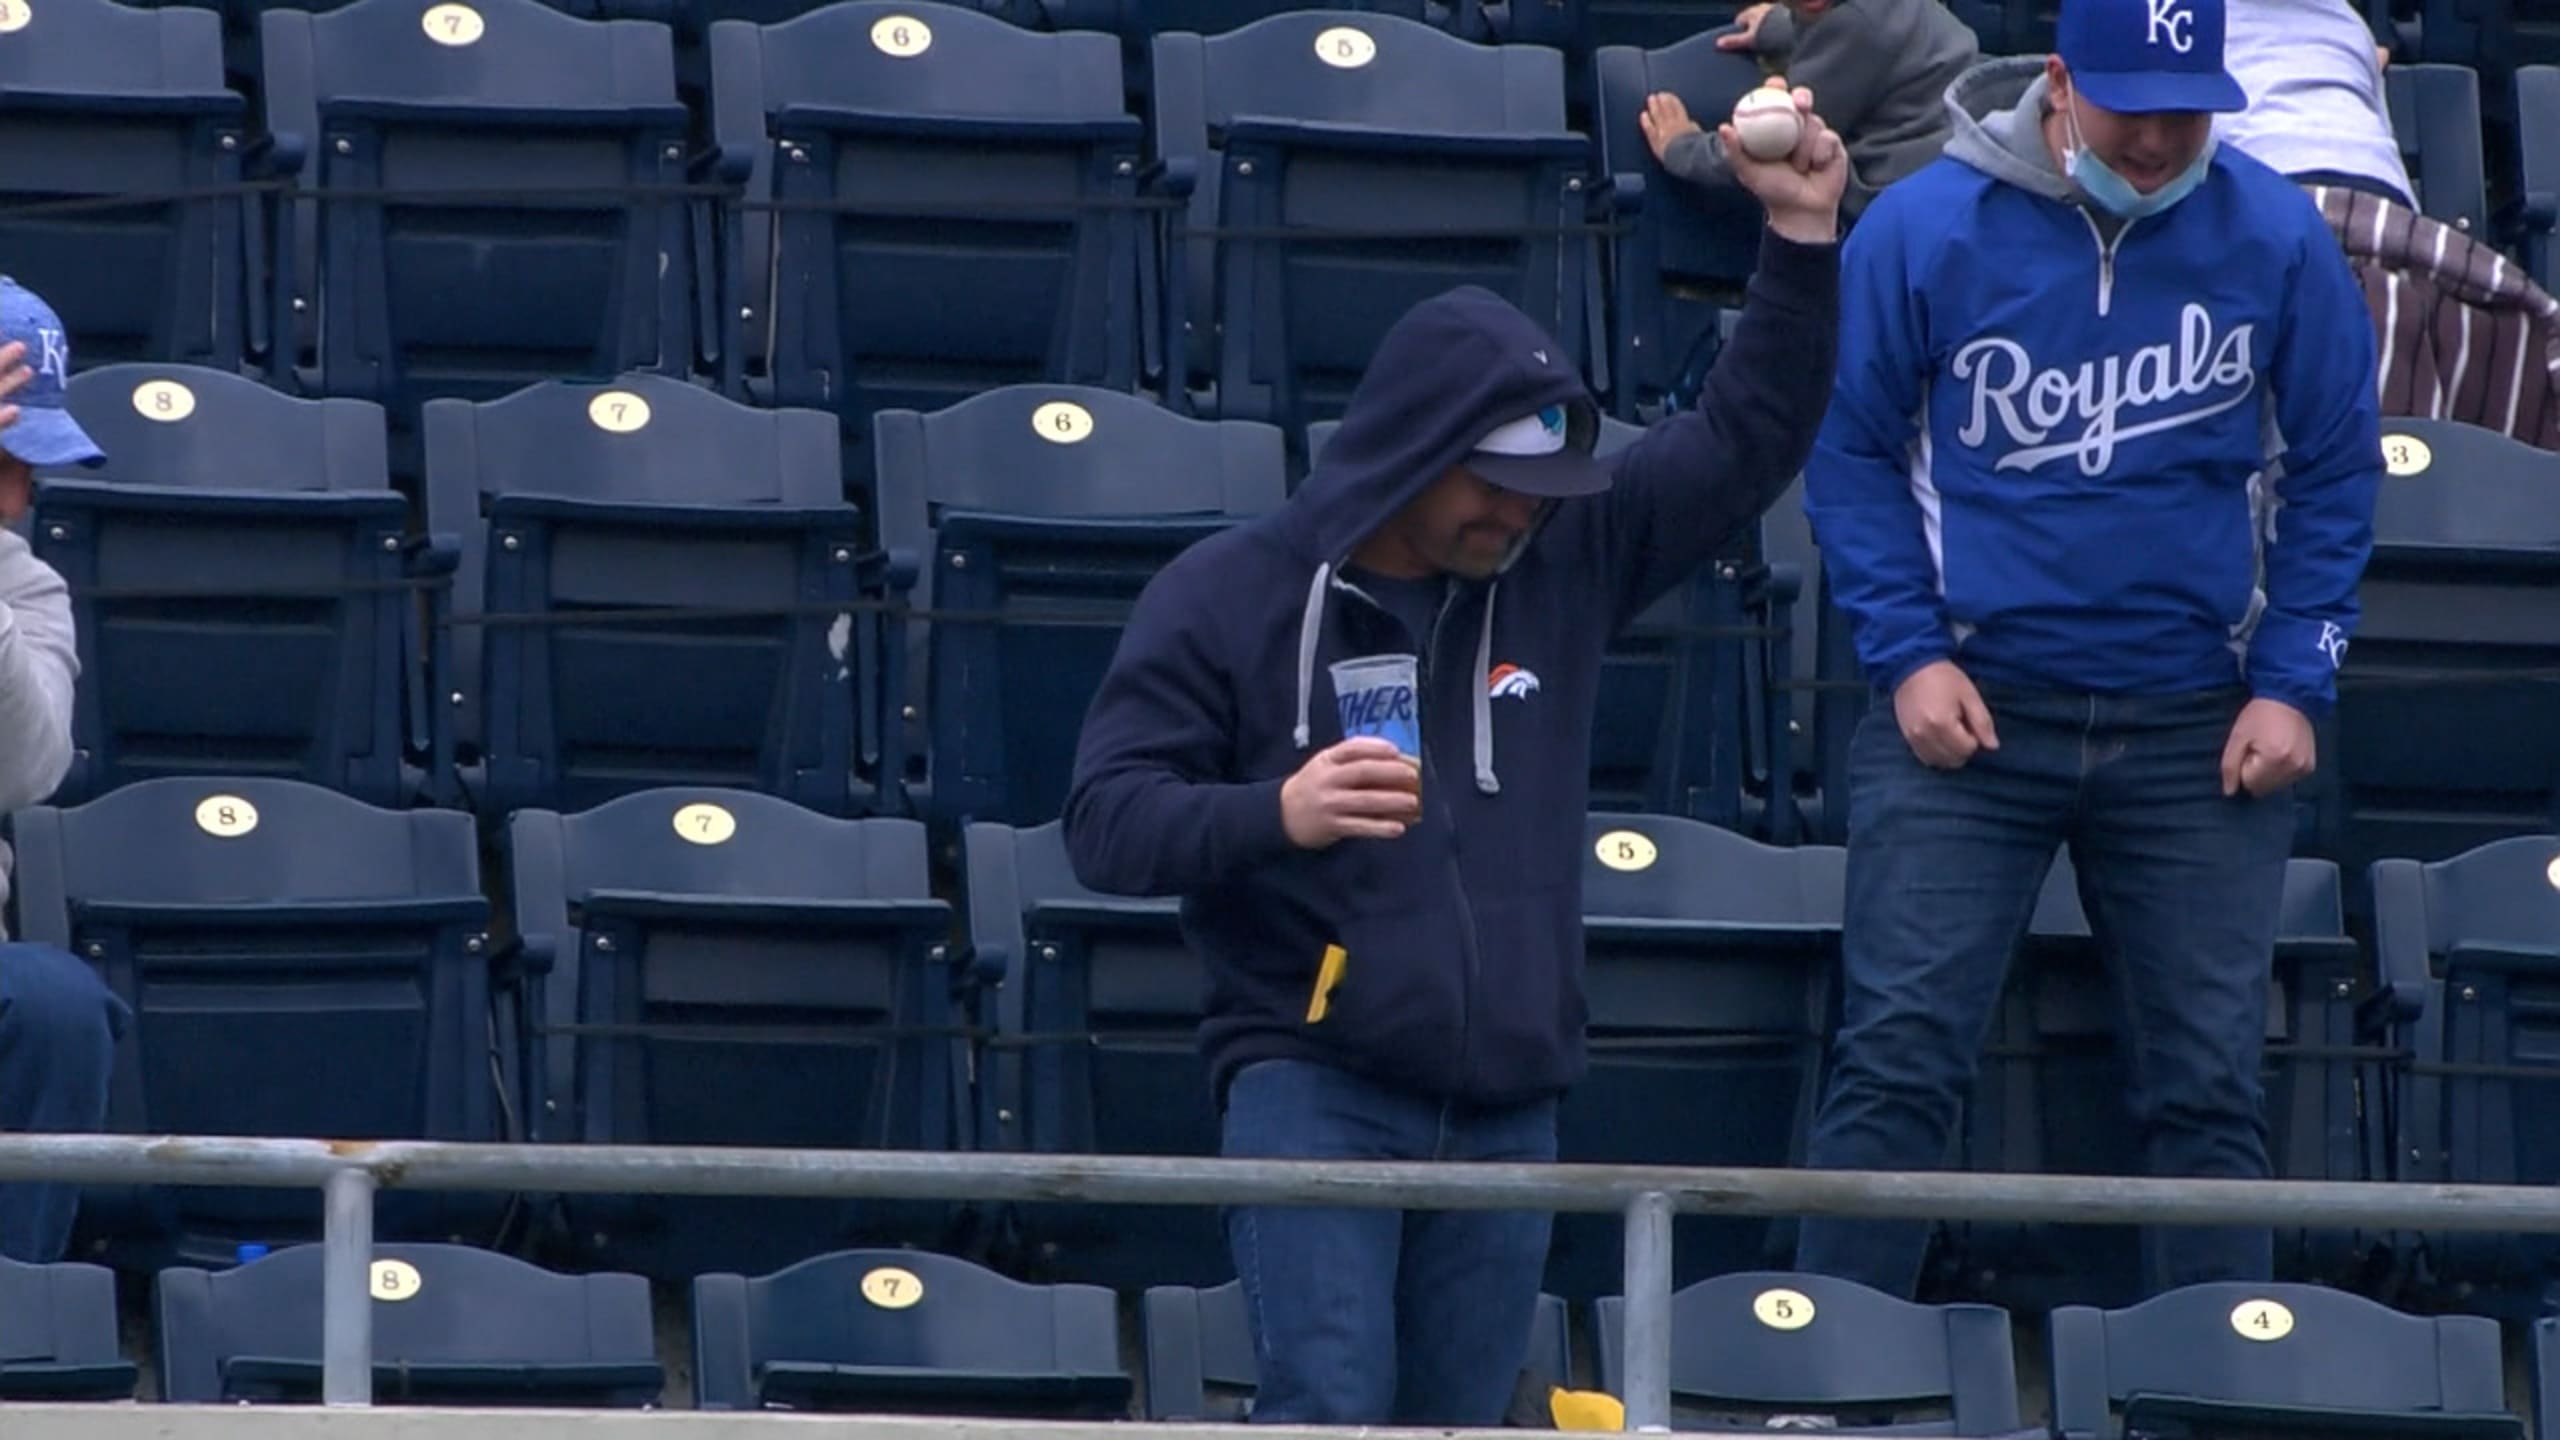 Royals fan catches home-run ball, but man takes it from him